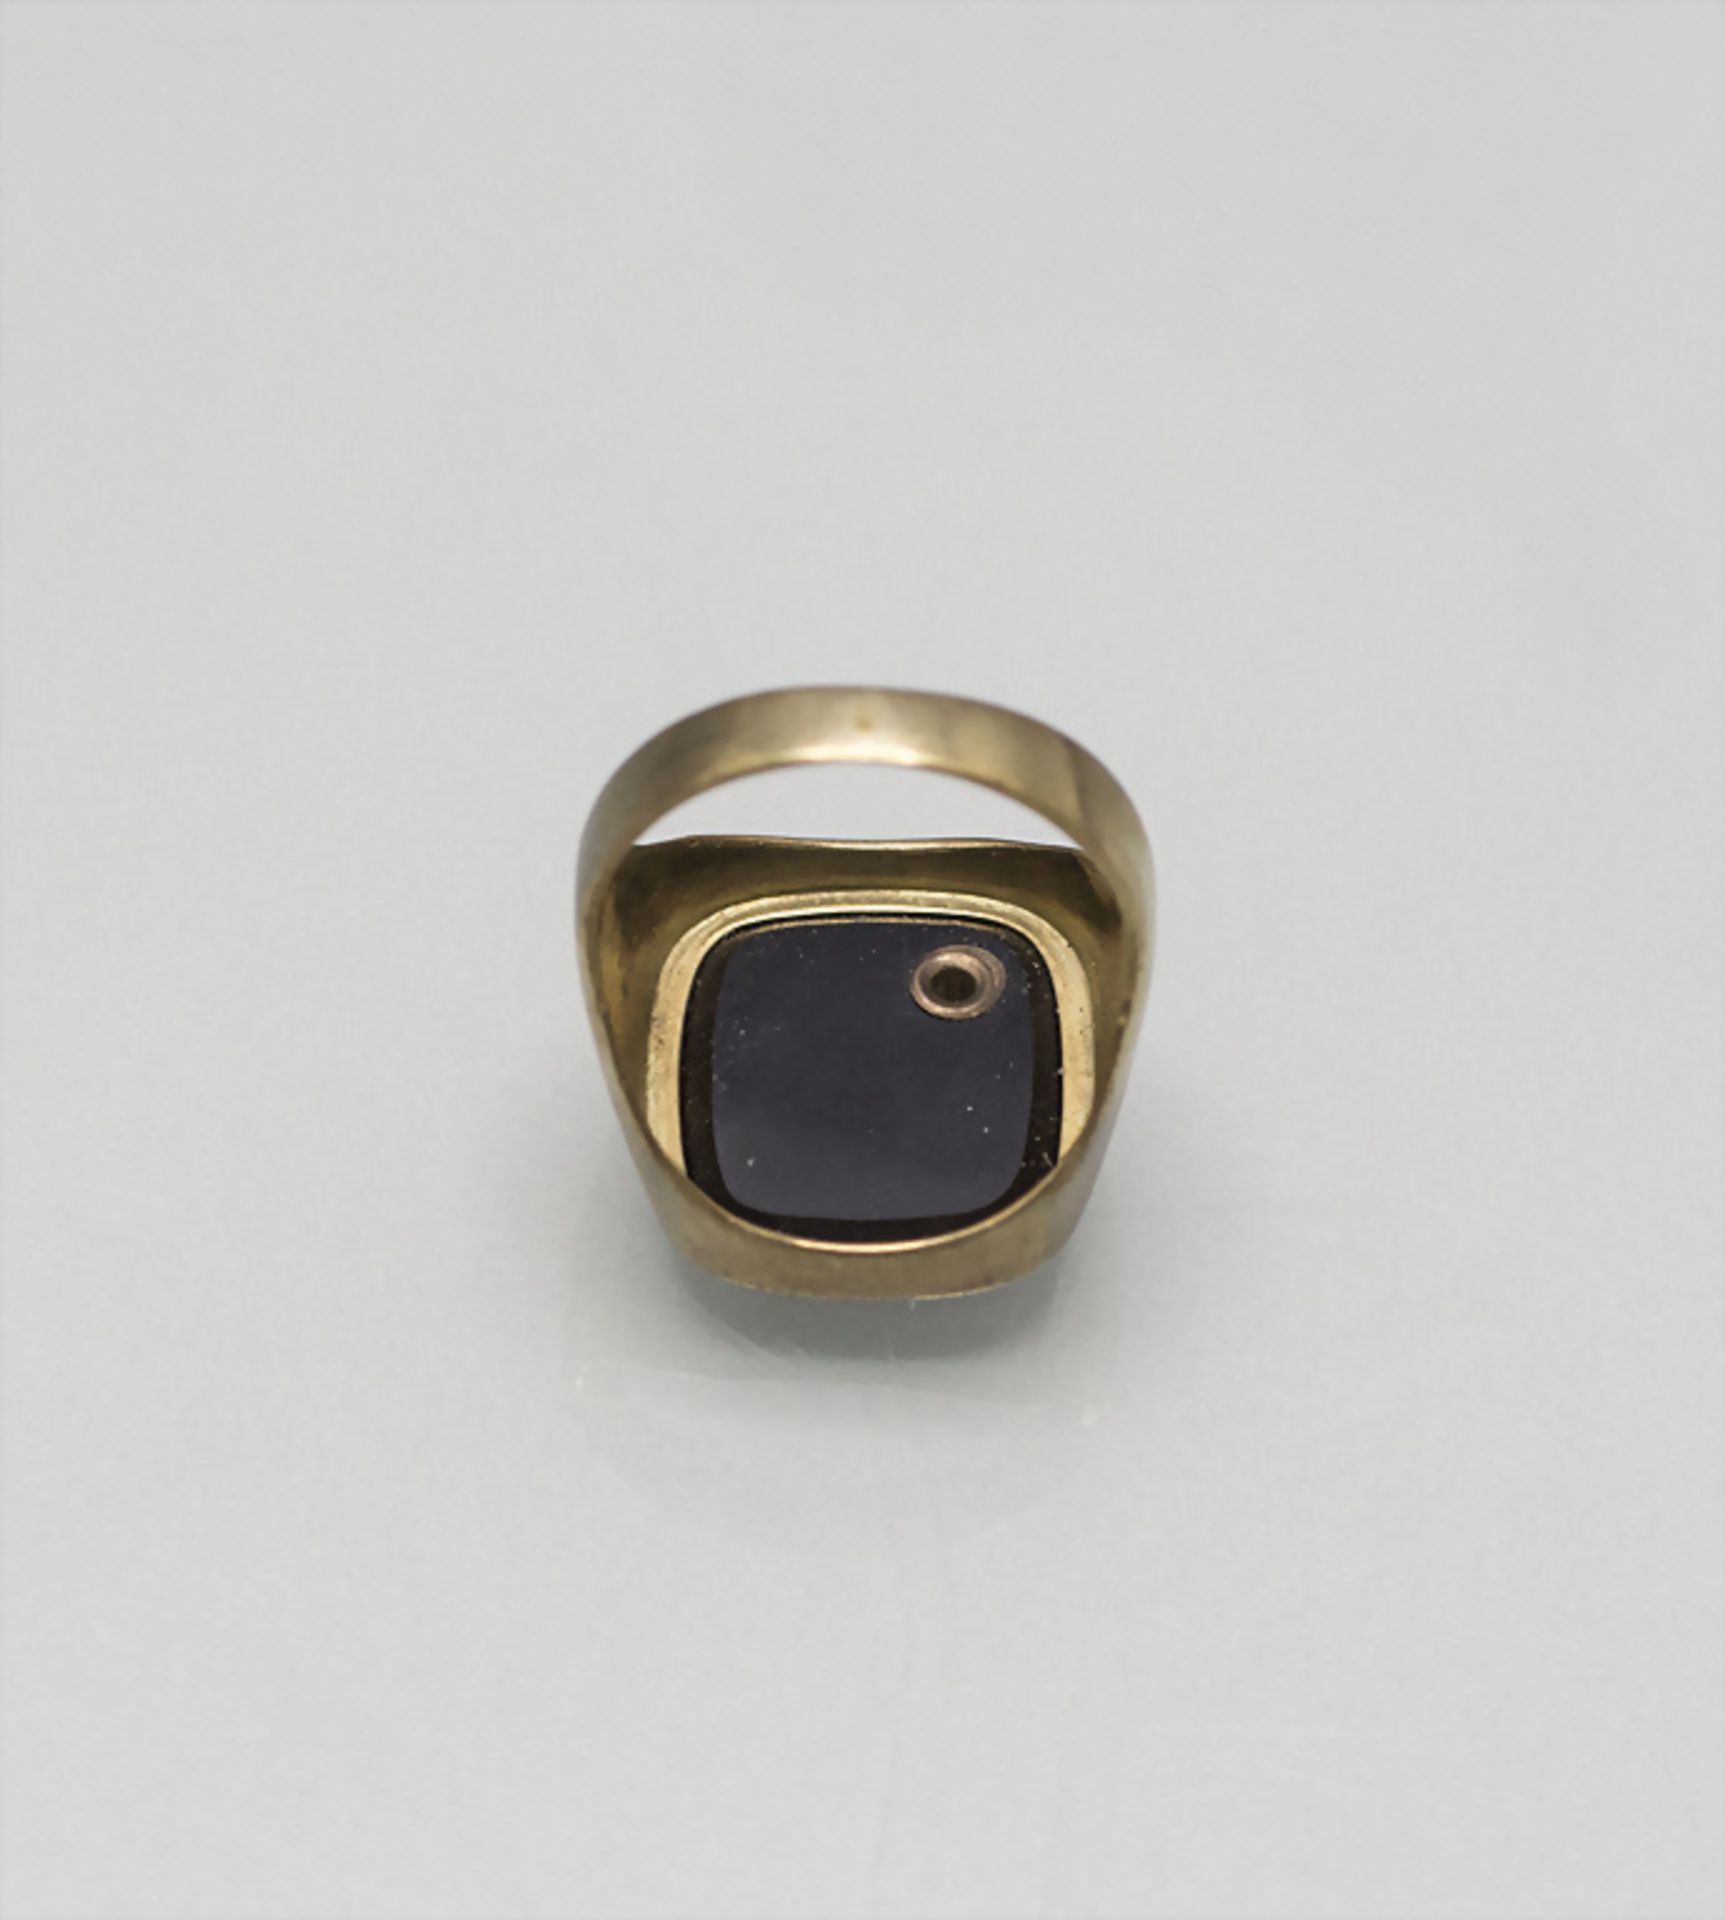 Herrenring mit Onyx und Diamant / A men's 8 ct gold ring with onyx and diamond - Image 5 of 5